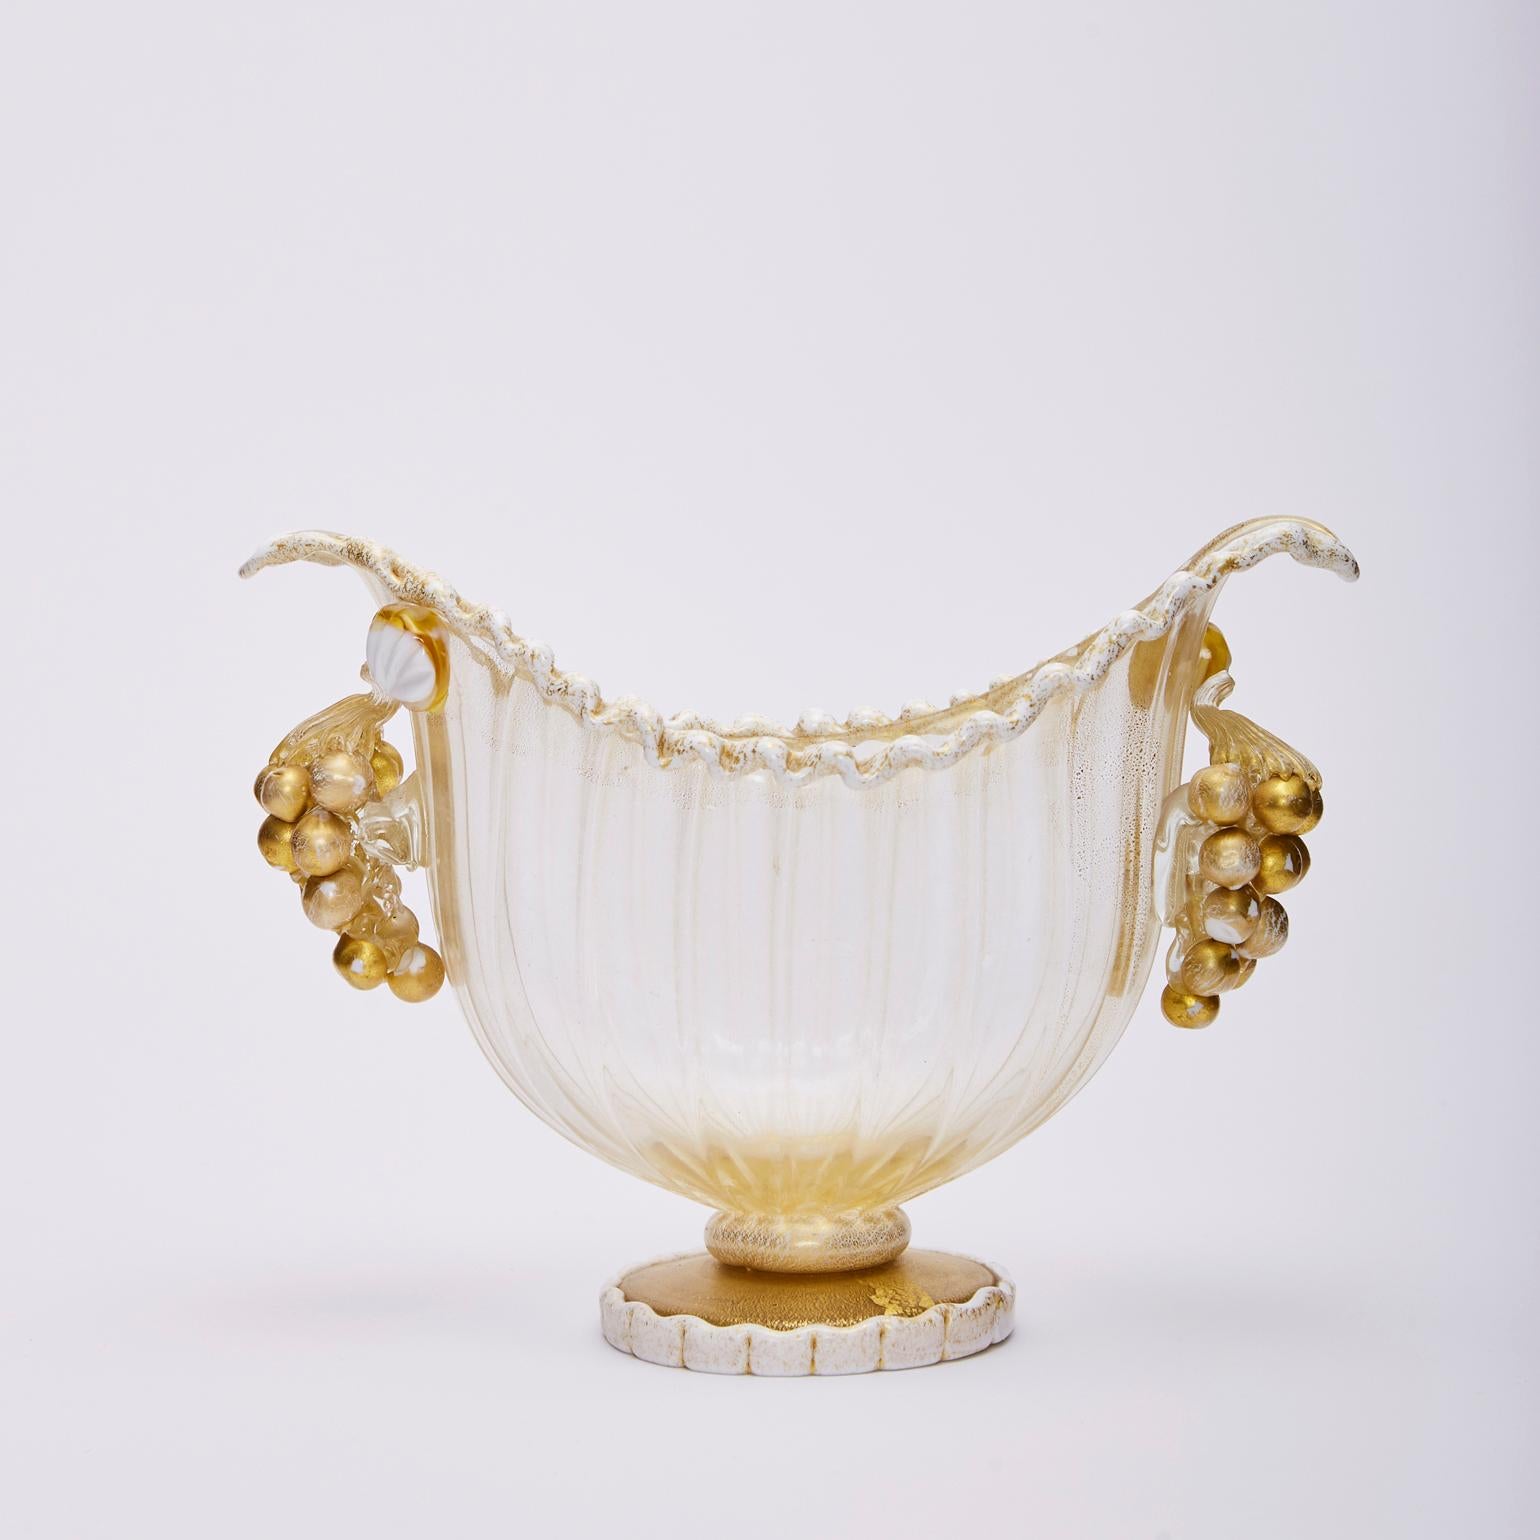 Mid-20th Century Footed Bowl Gold Leaf and Grapes, Ercole Barovier for Barovier Toso & Co 1949 For Sale